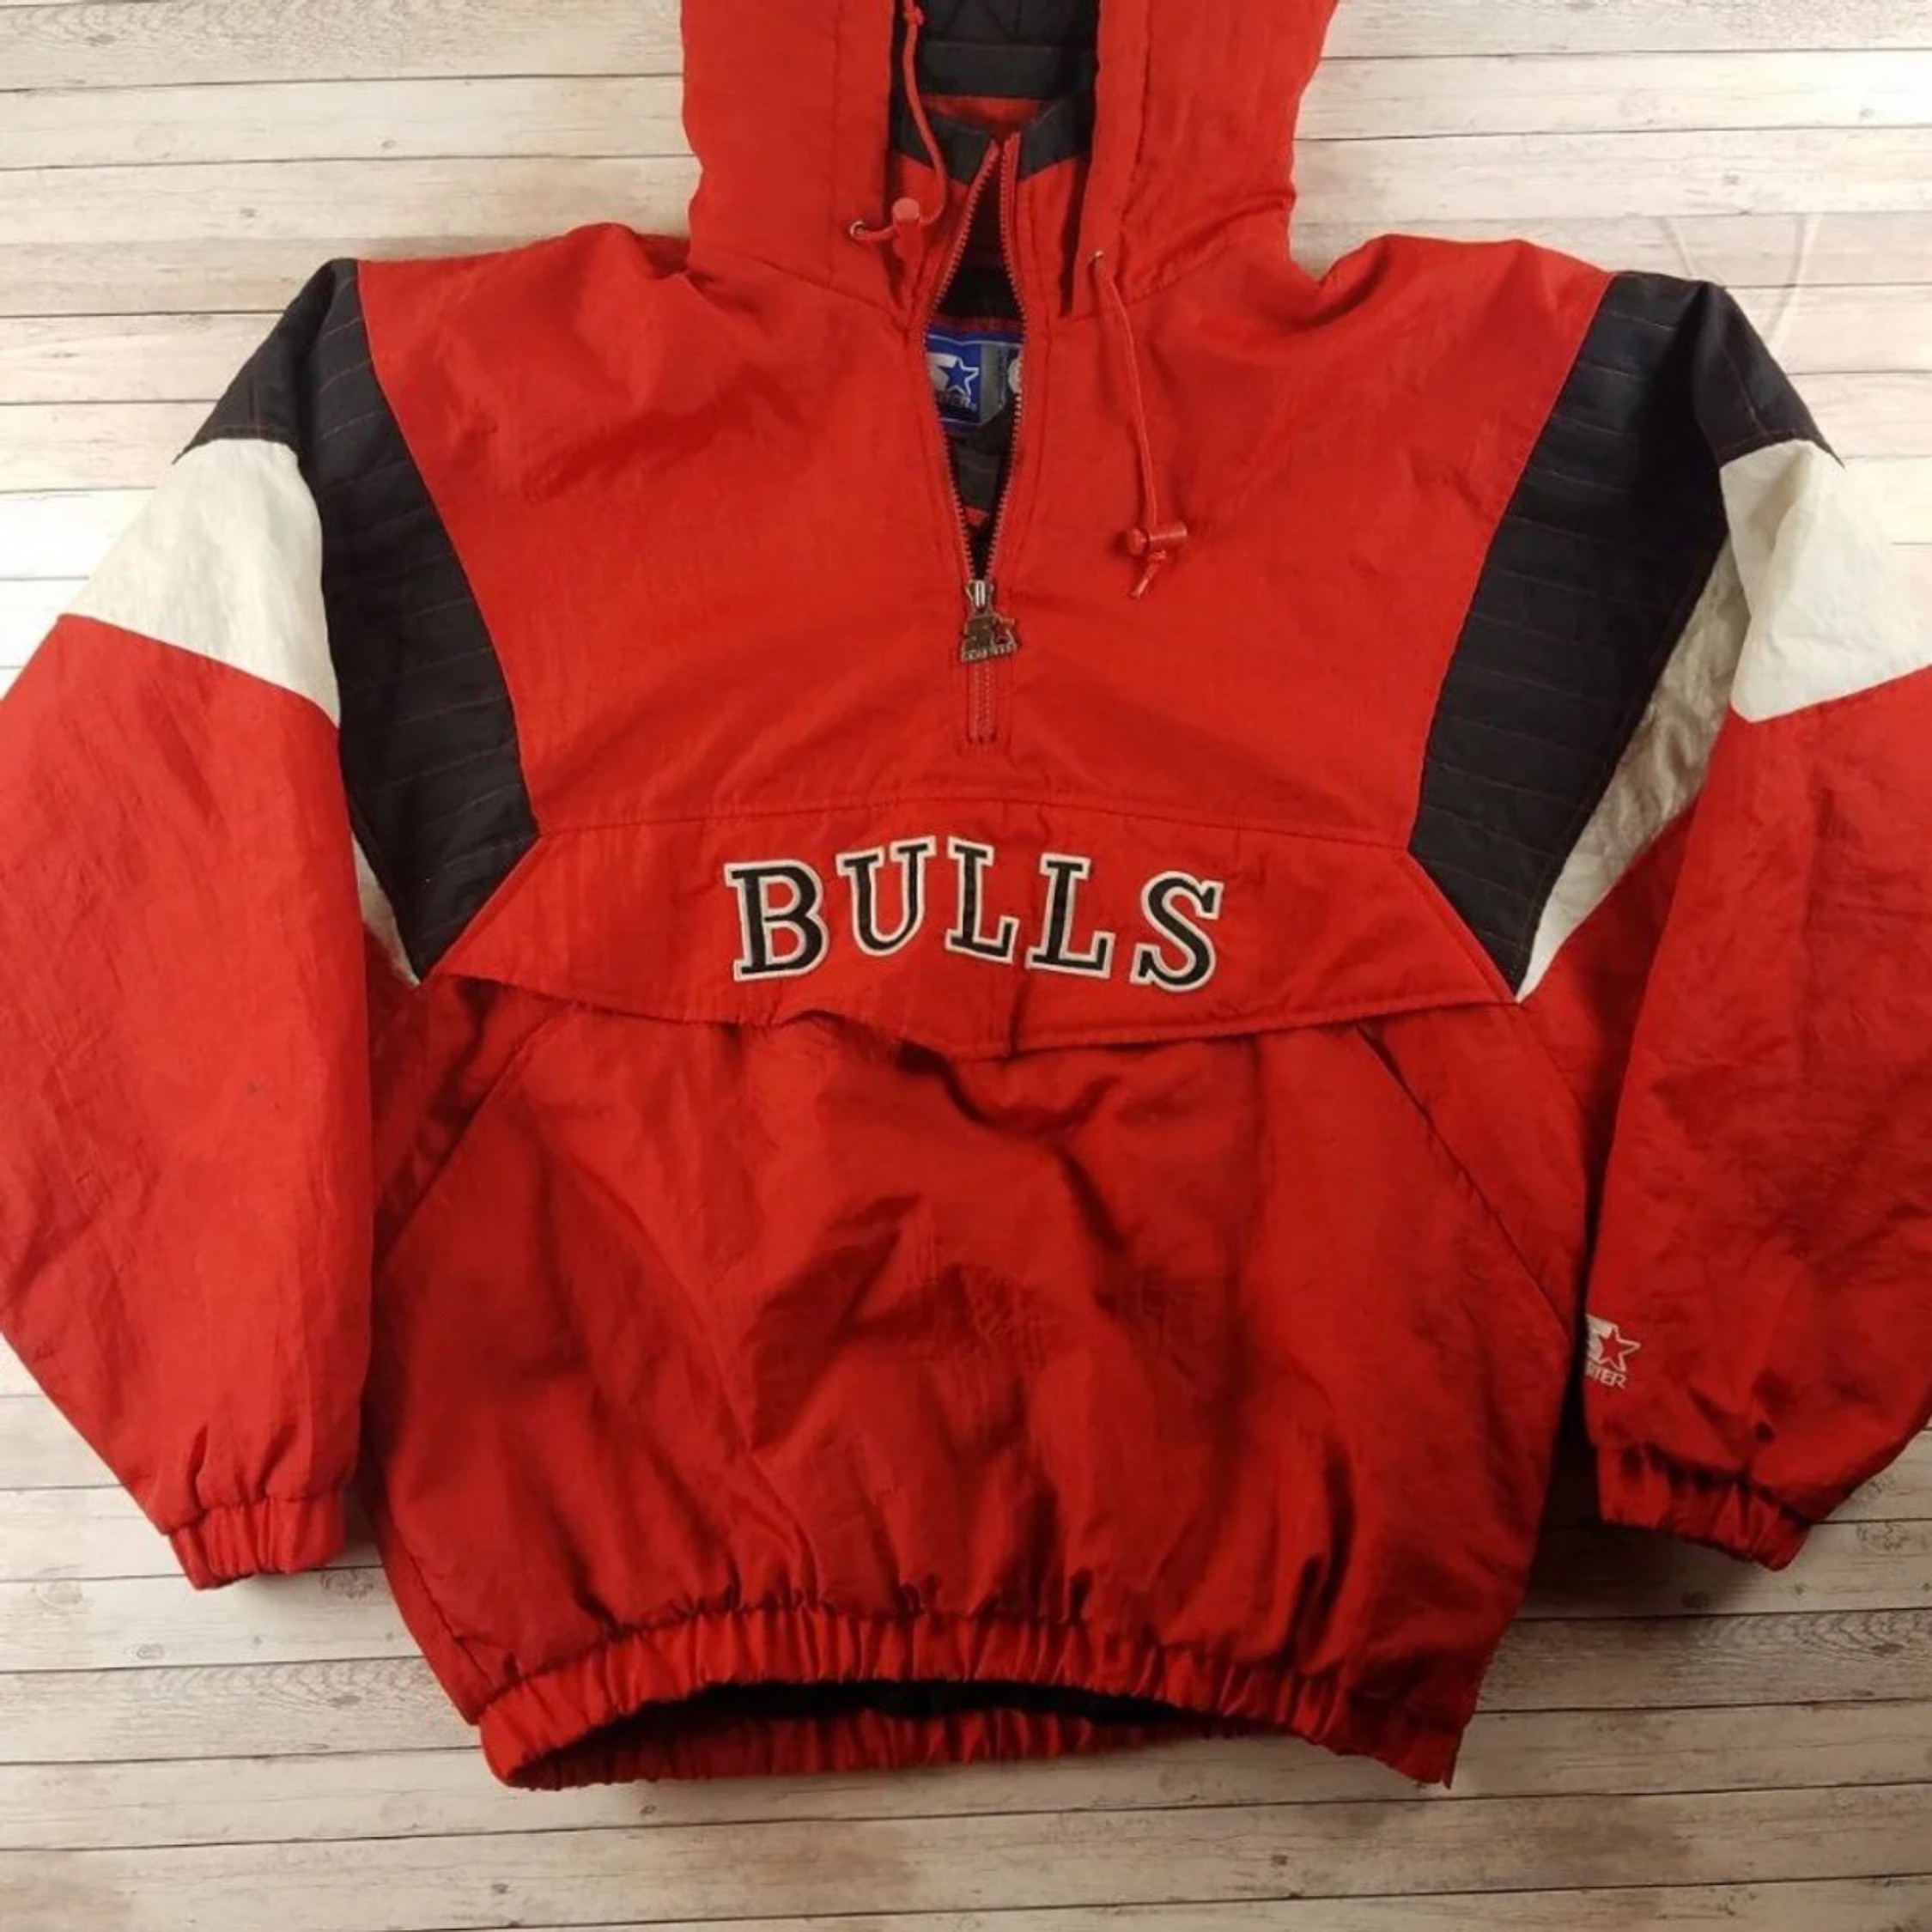 Anybody got an old school Starter jacket? : Page 2